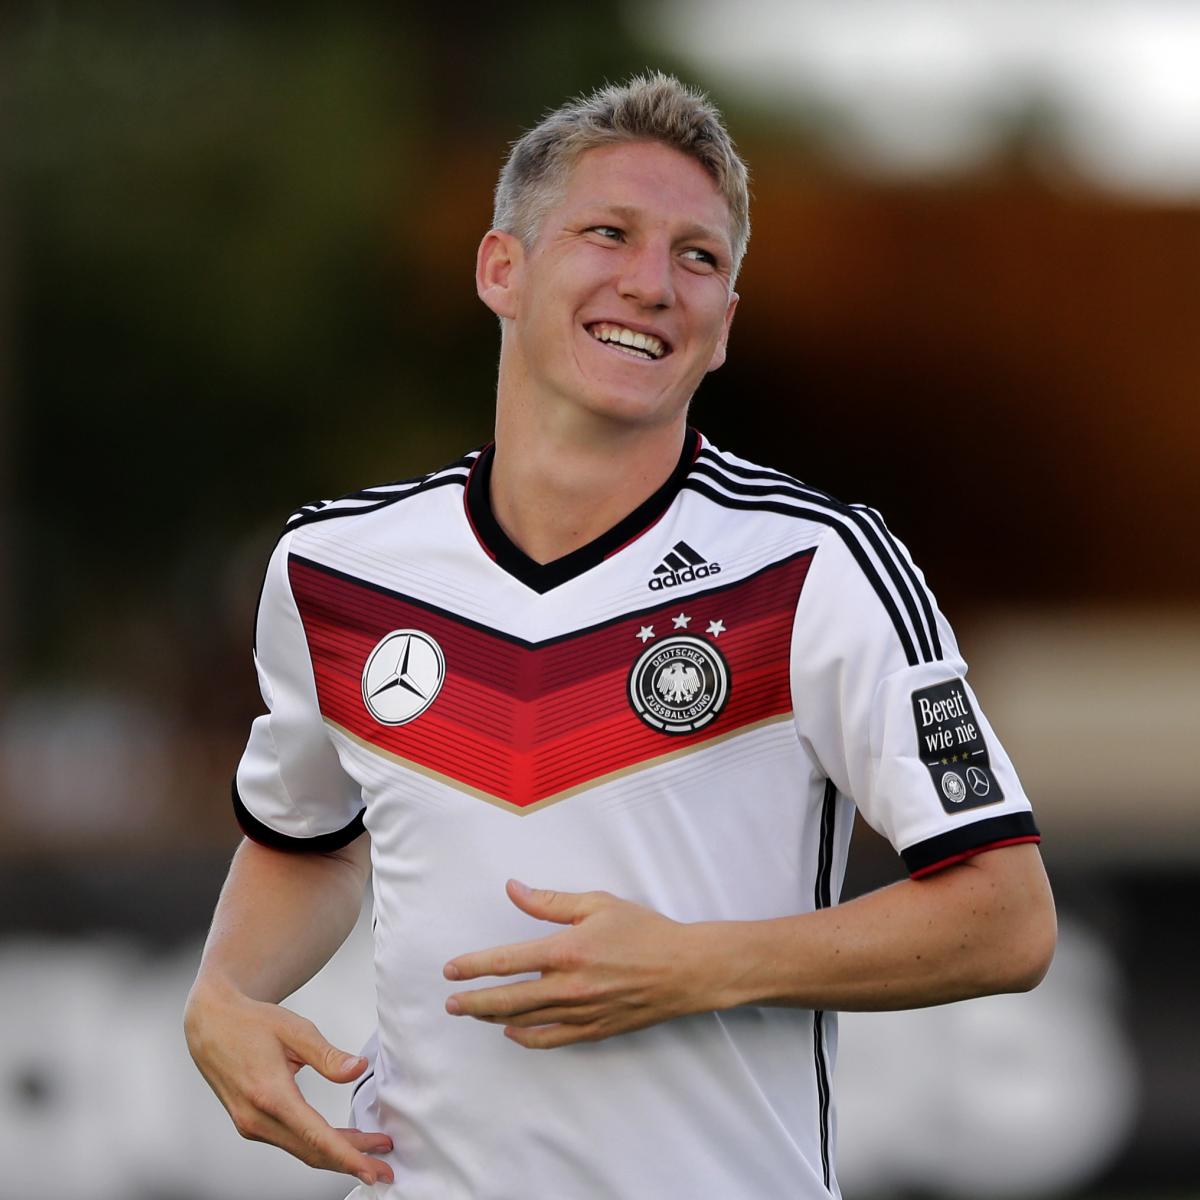 Bastian Schweinsteiger Would Be a Dream Signing for Manchester United